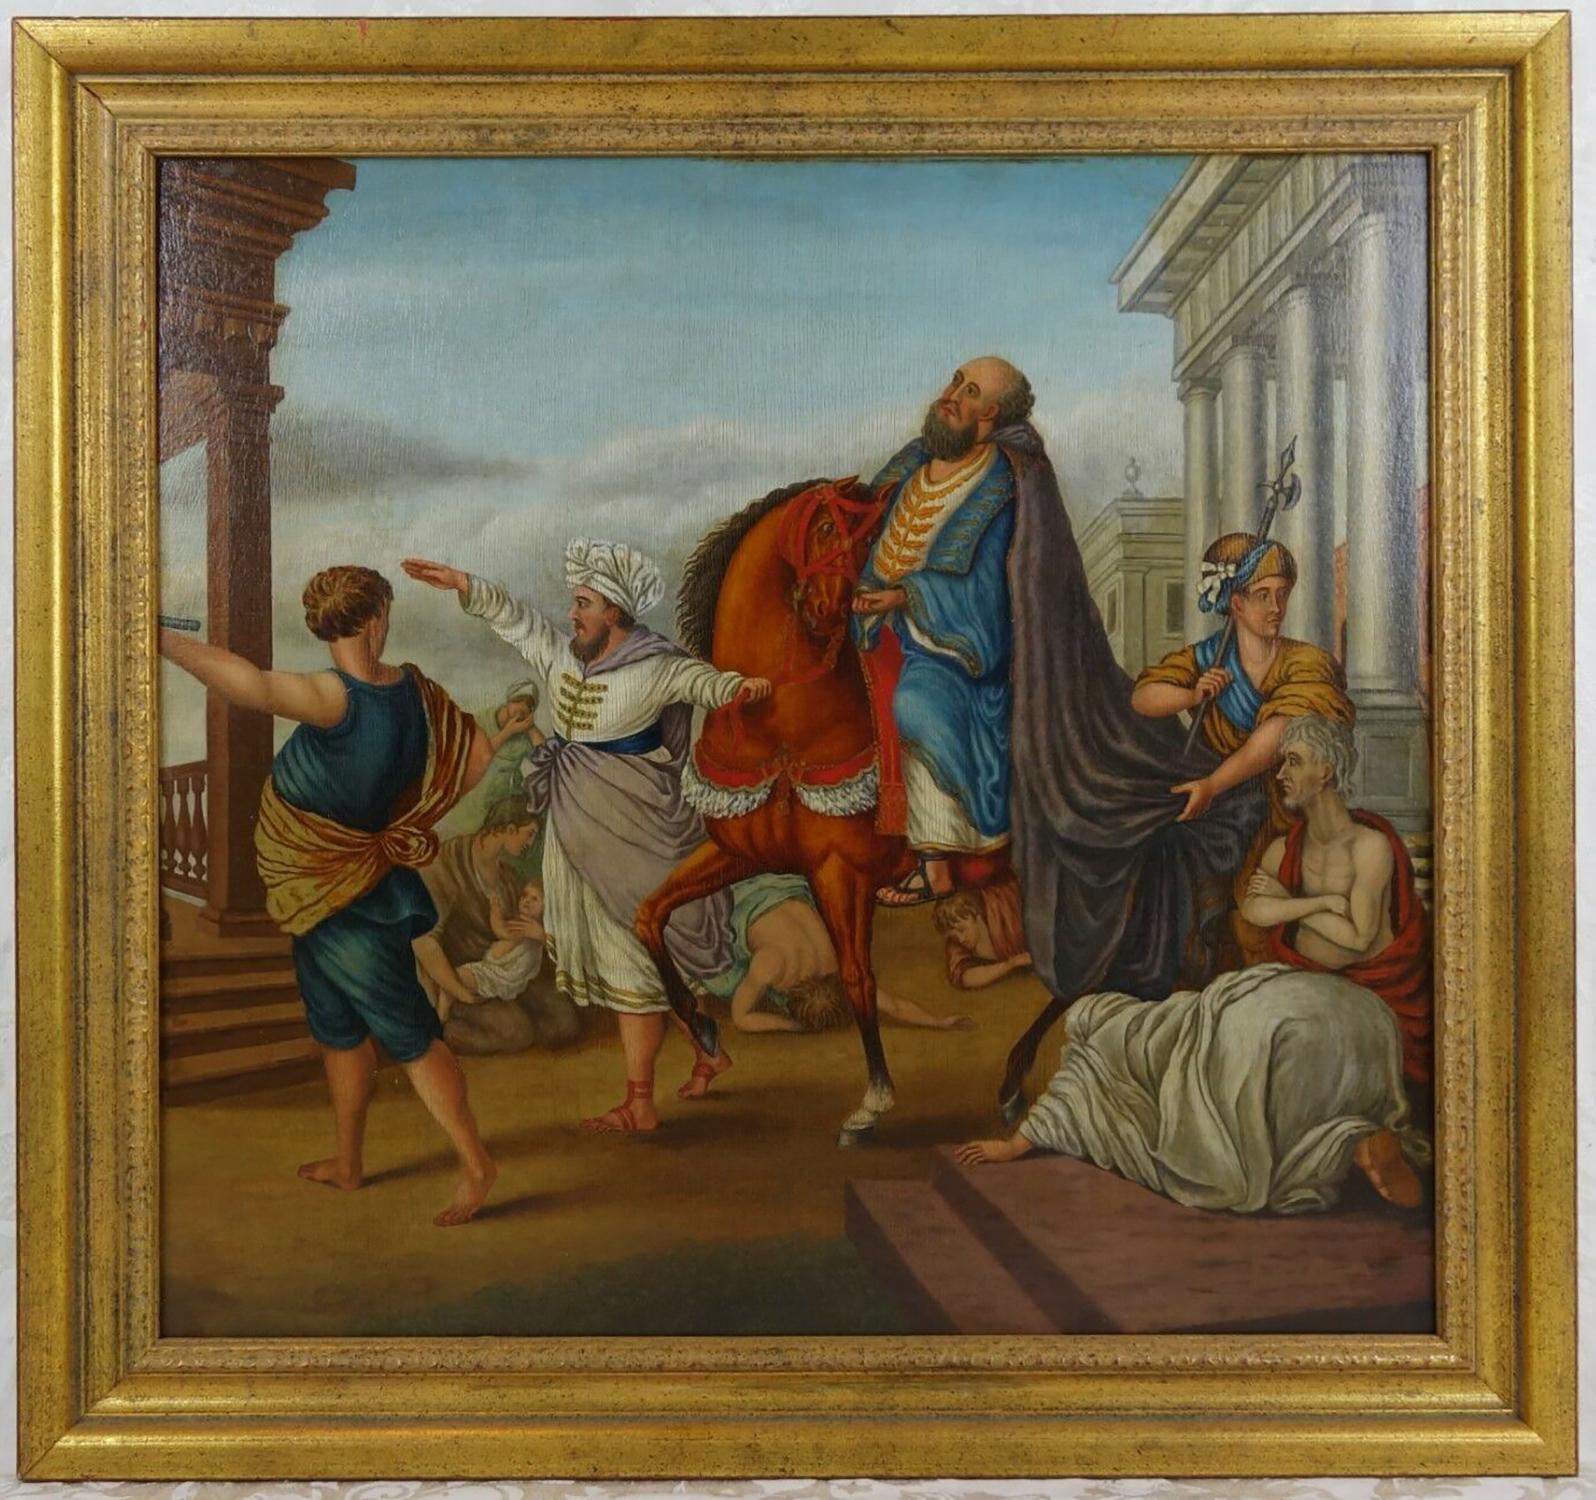 Unknown Figurative Painting - Antique 18th c. Italian Figurative Oil on Board Painting - Emperor's Procession